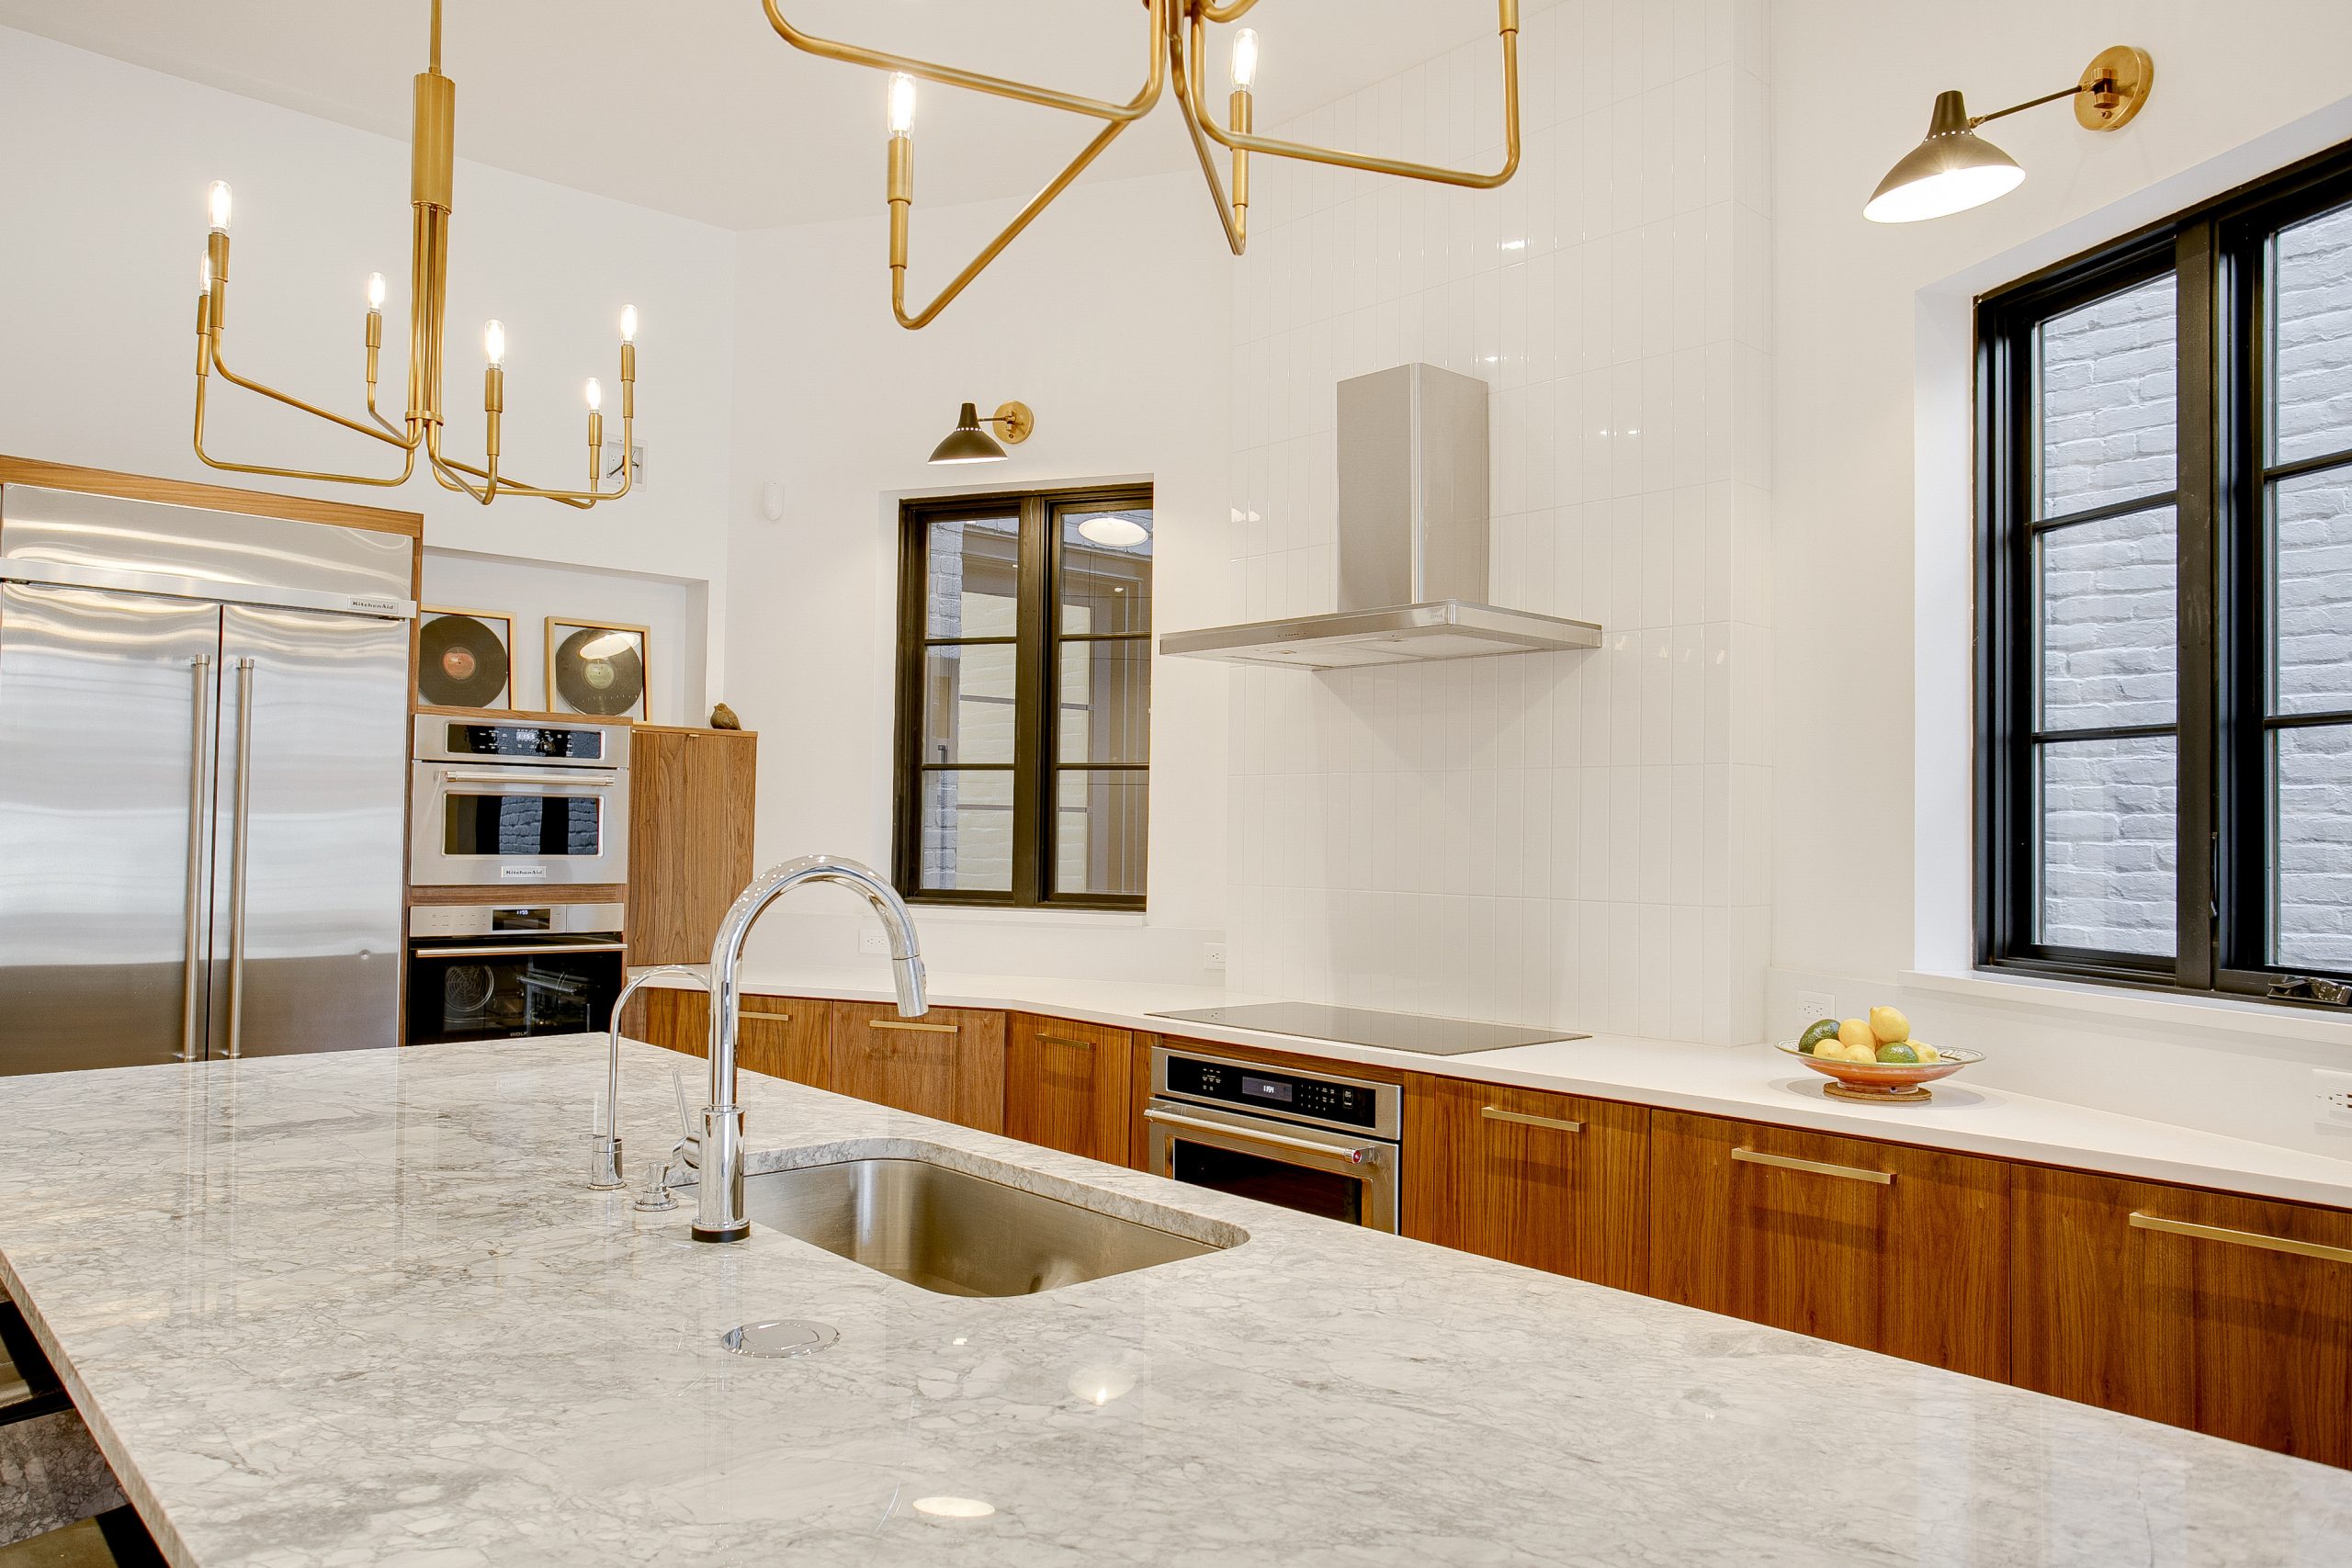 Where to buy Marble Countertops